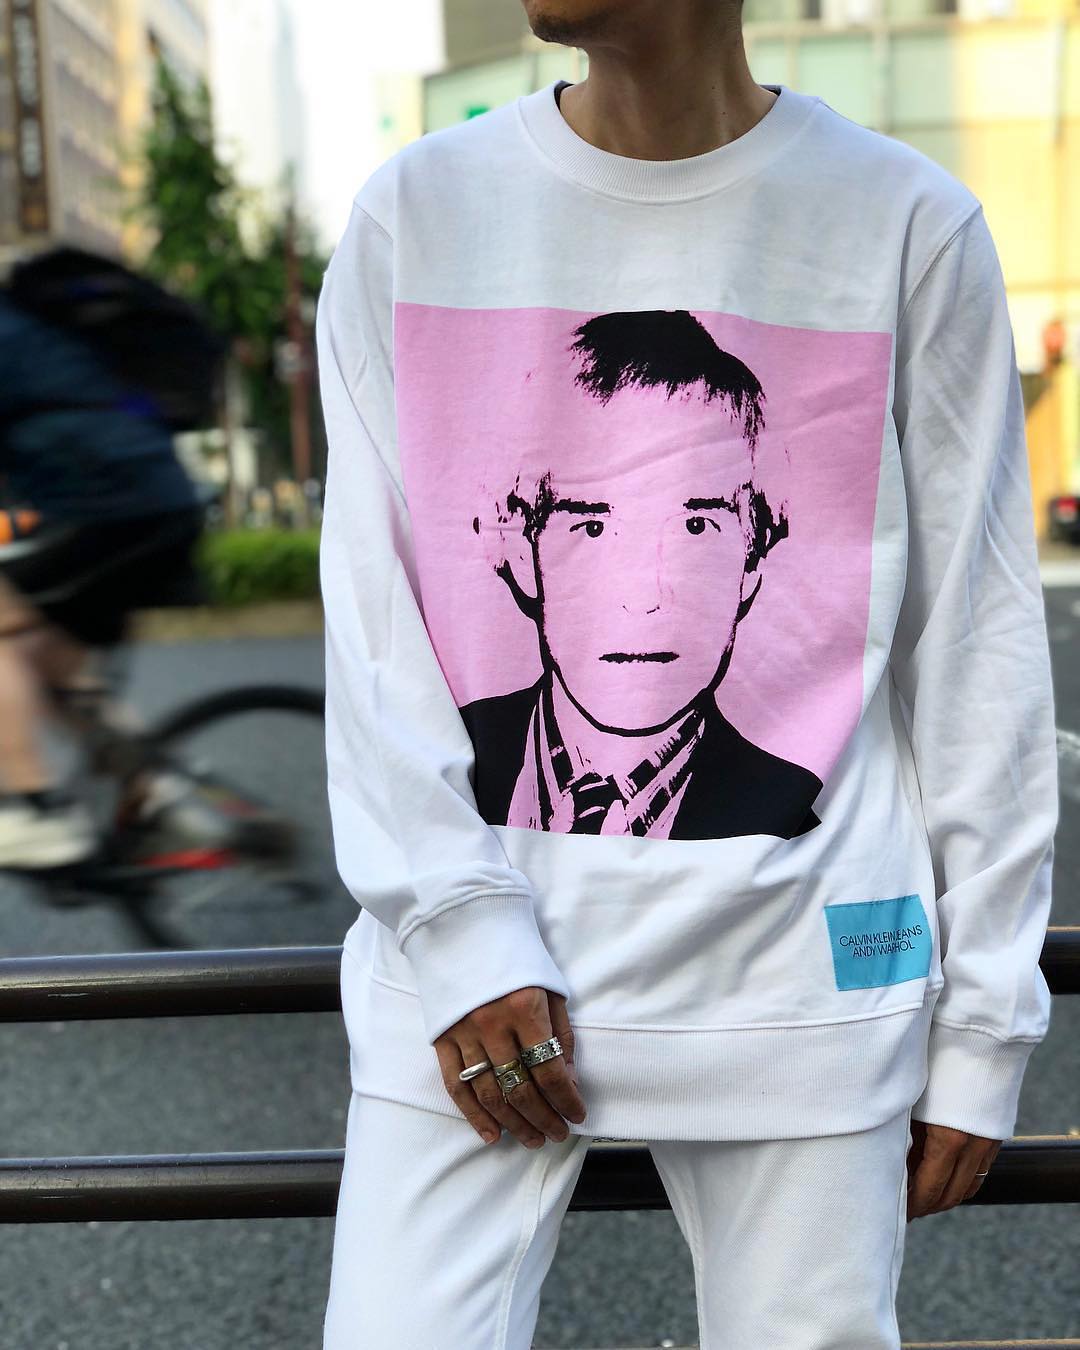 An Andy Warhol self-portrait printed on a crew-neck shirt by Calvin Klein Jeans. Image courtesy of Calvin Klein's Instagram